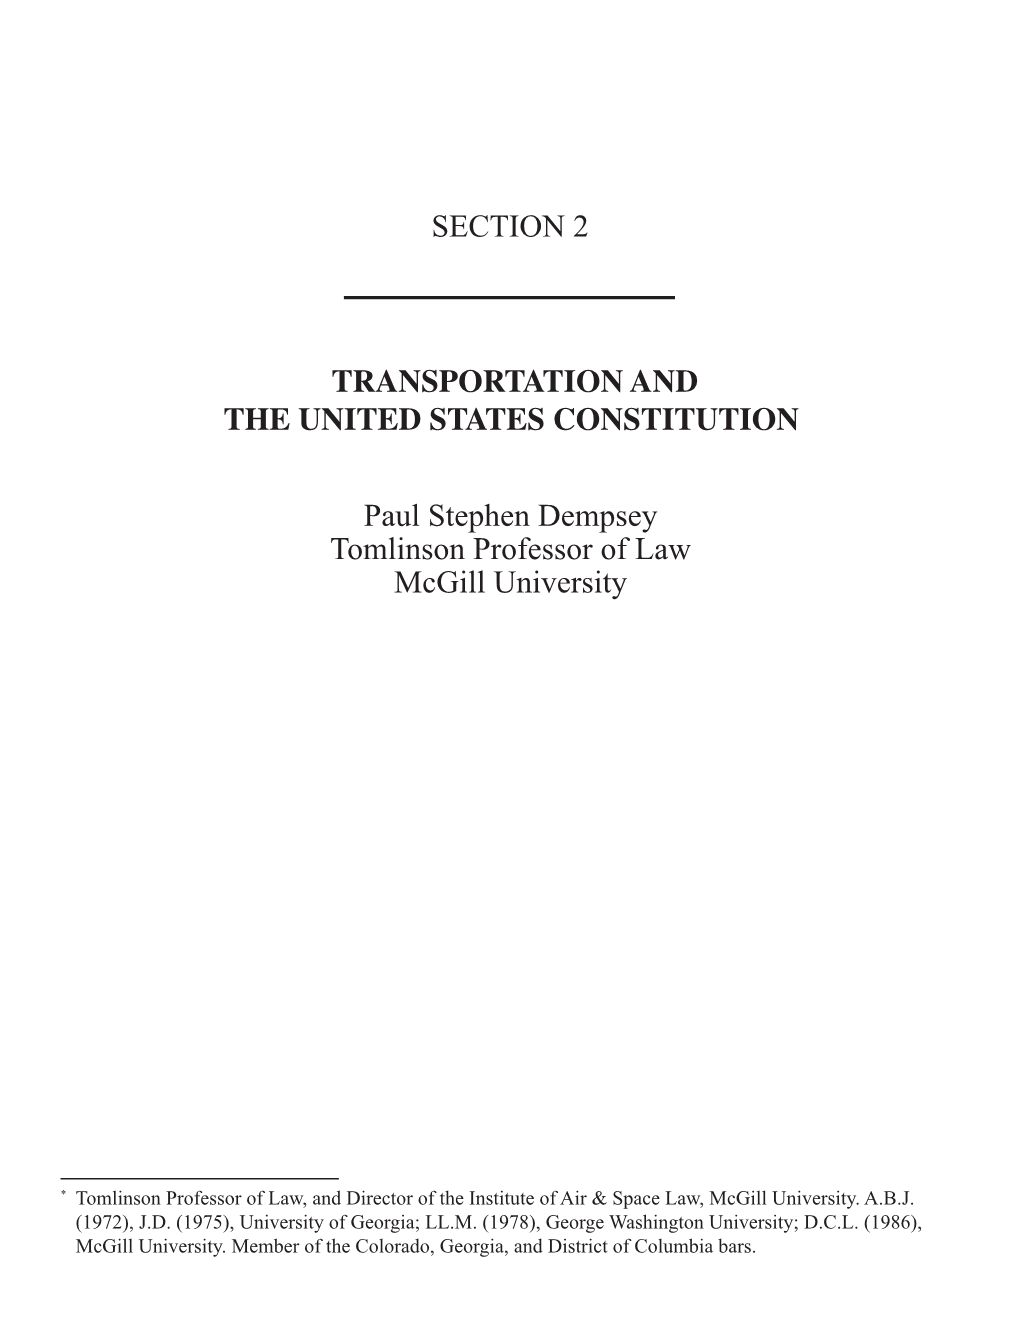 Transportation and the United States Constitution